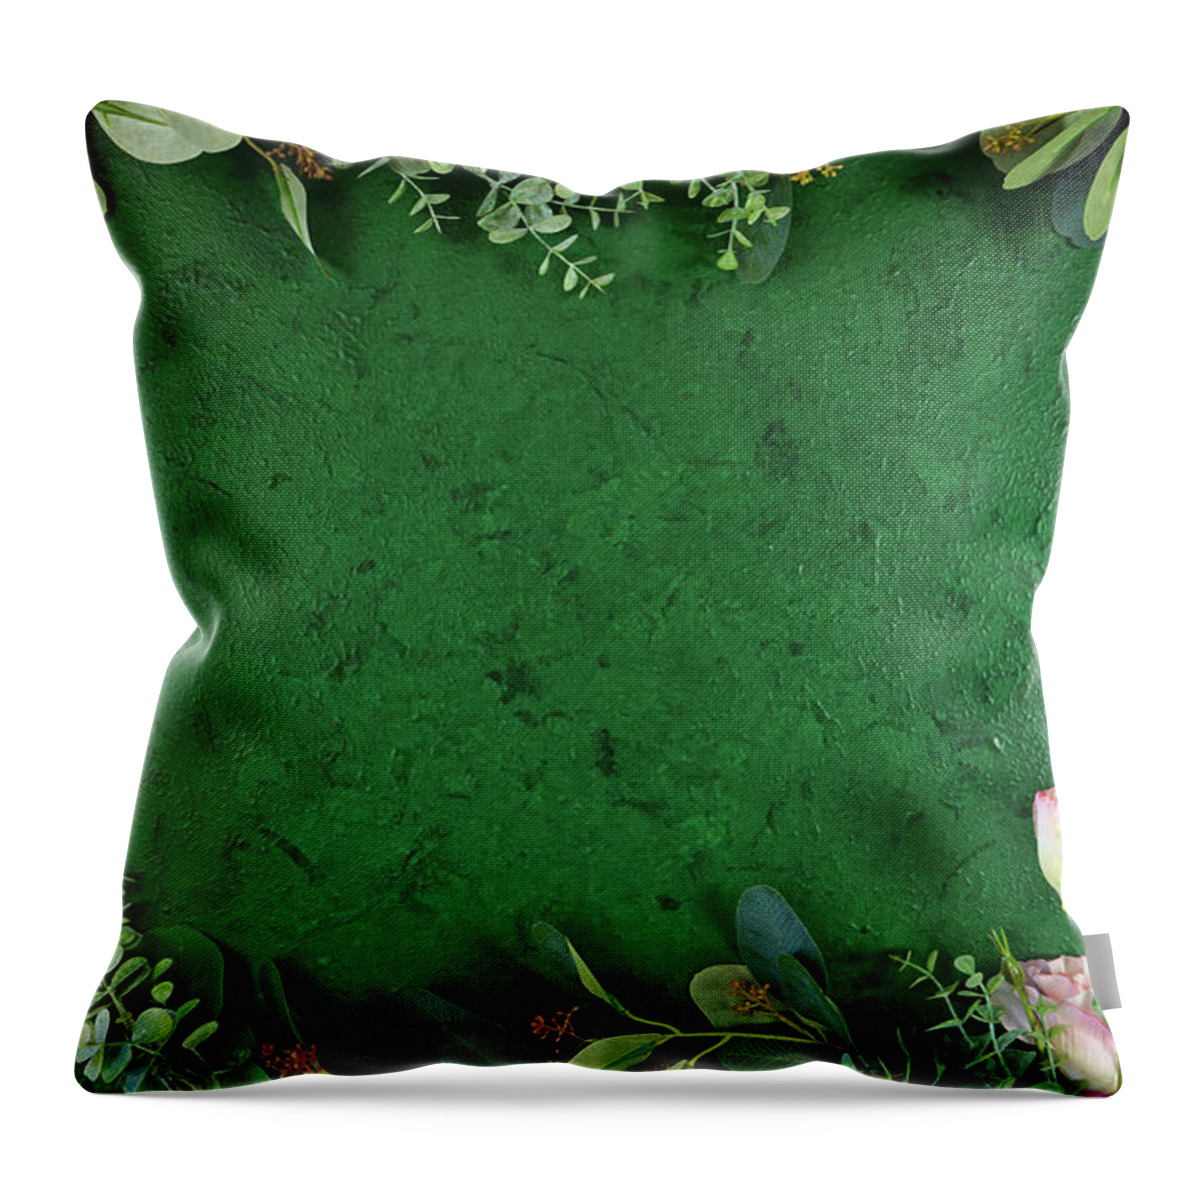 Dark Green Throw Pillow featuring the photograph Dark green aesthetic nature theme creative layout flat lay background. by Milleflore Images